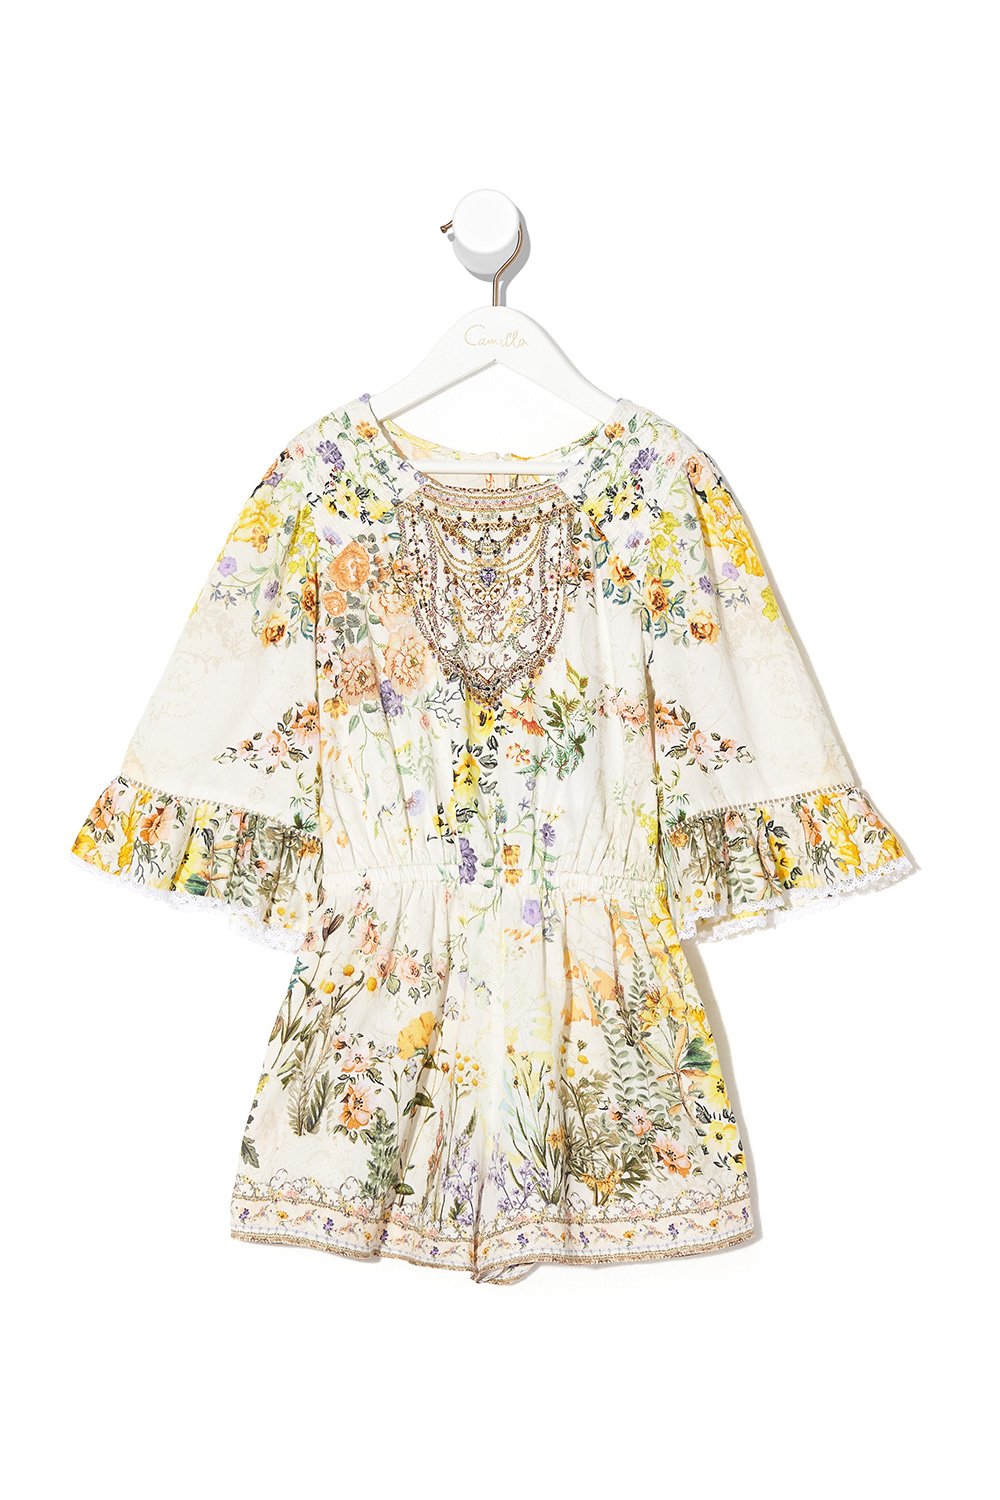 KIDS PLAYSUIT WITH TRIM IN THE HILLS OF TUSCANY